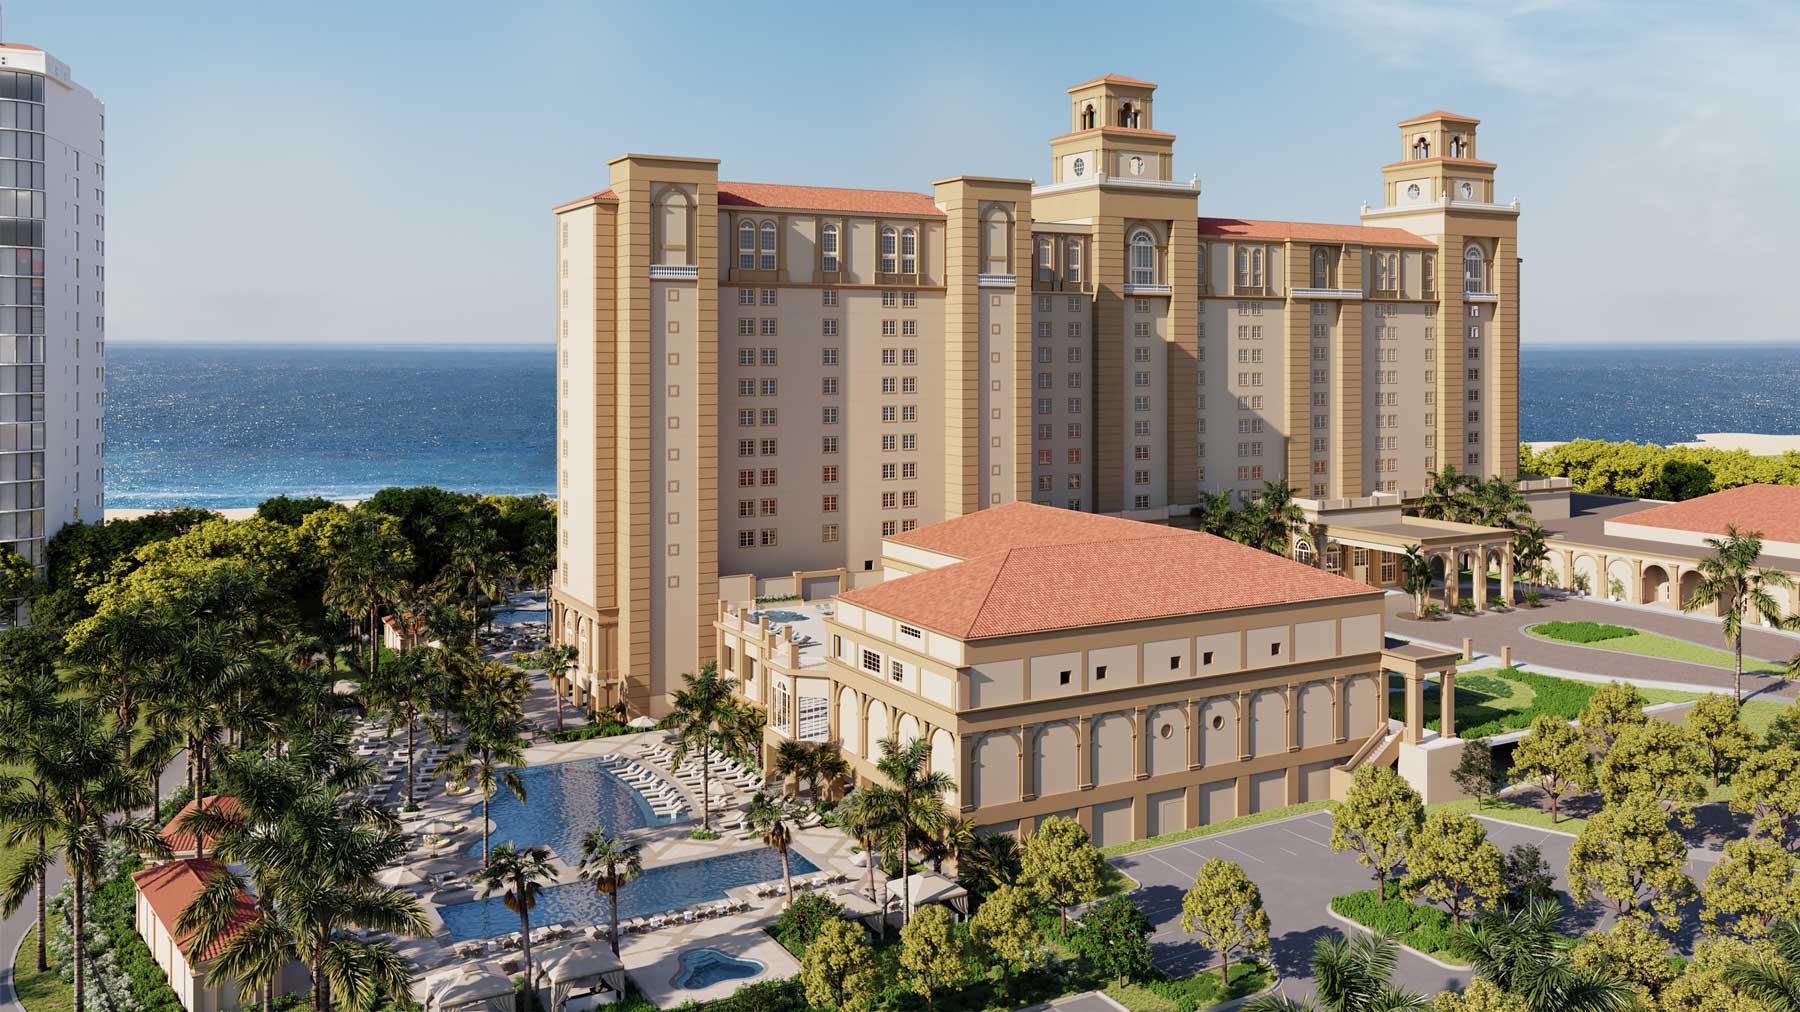 The Vanderbilt Tower is the resort's Club Level tower with enhanced amenities and direct views of the Gulf of Mexico.